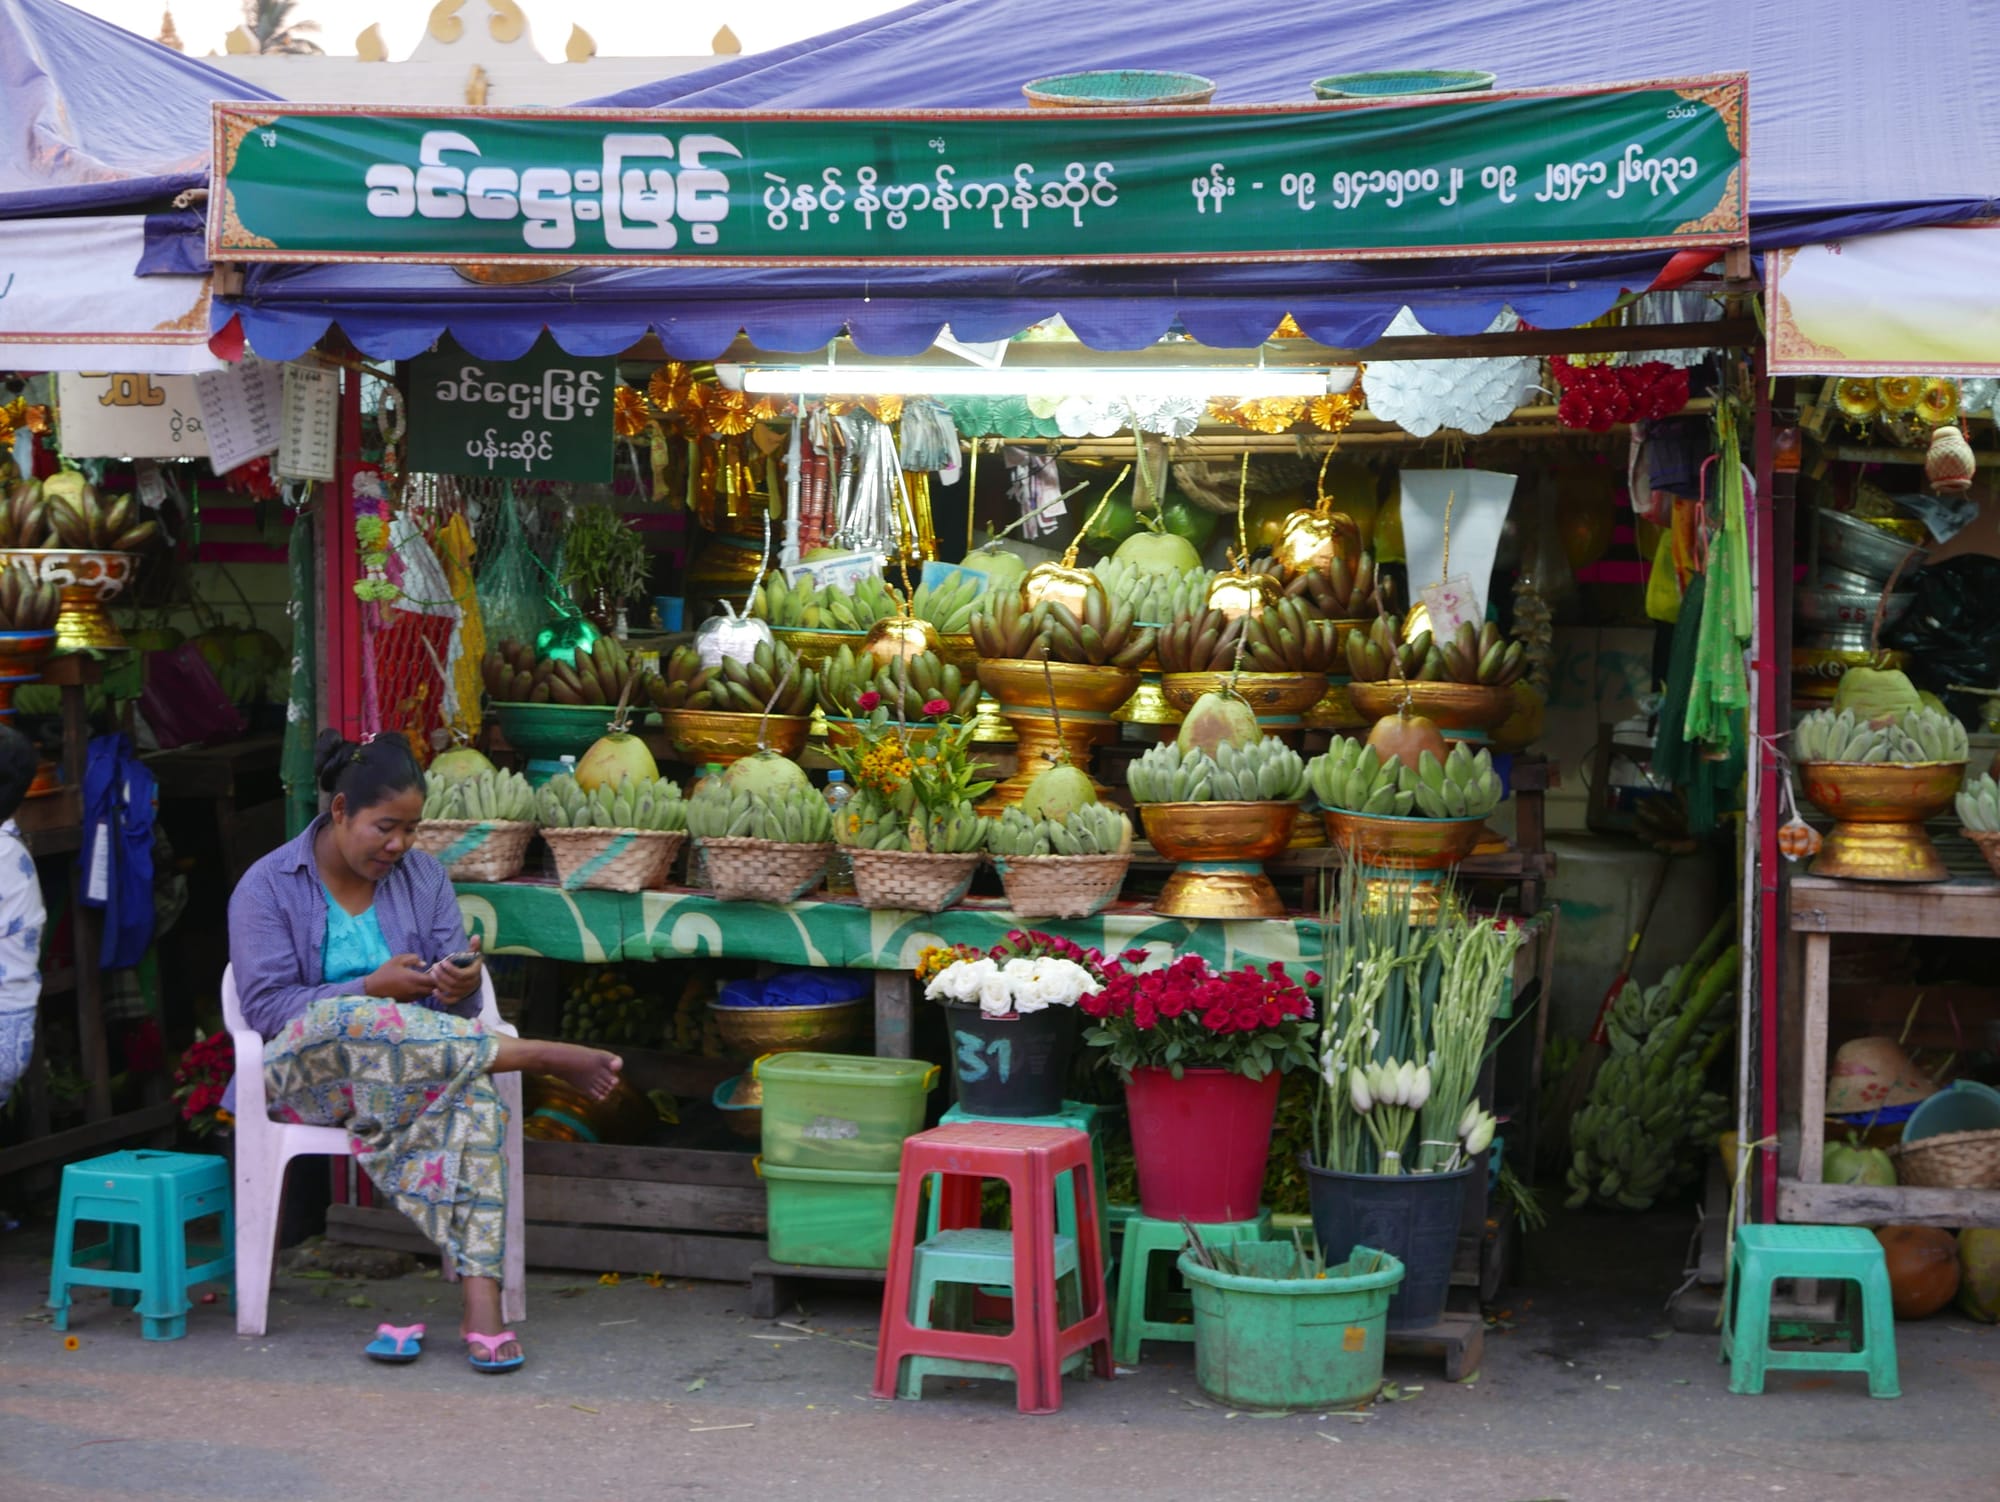 Photo by Author — Temple offerings stall at the local market